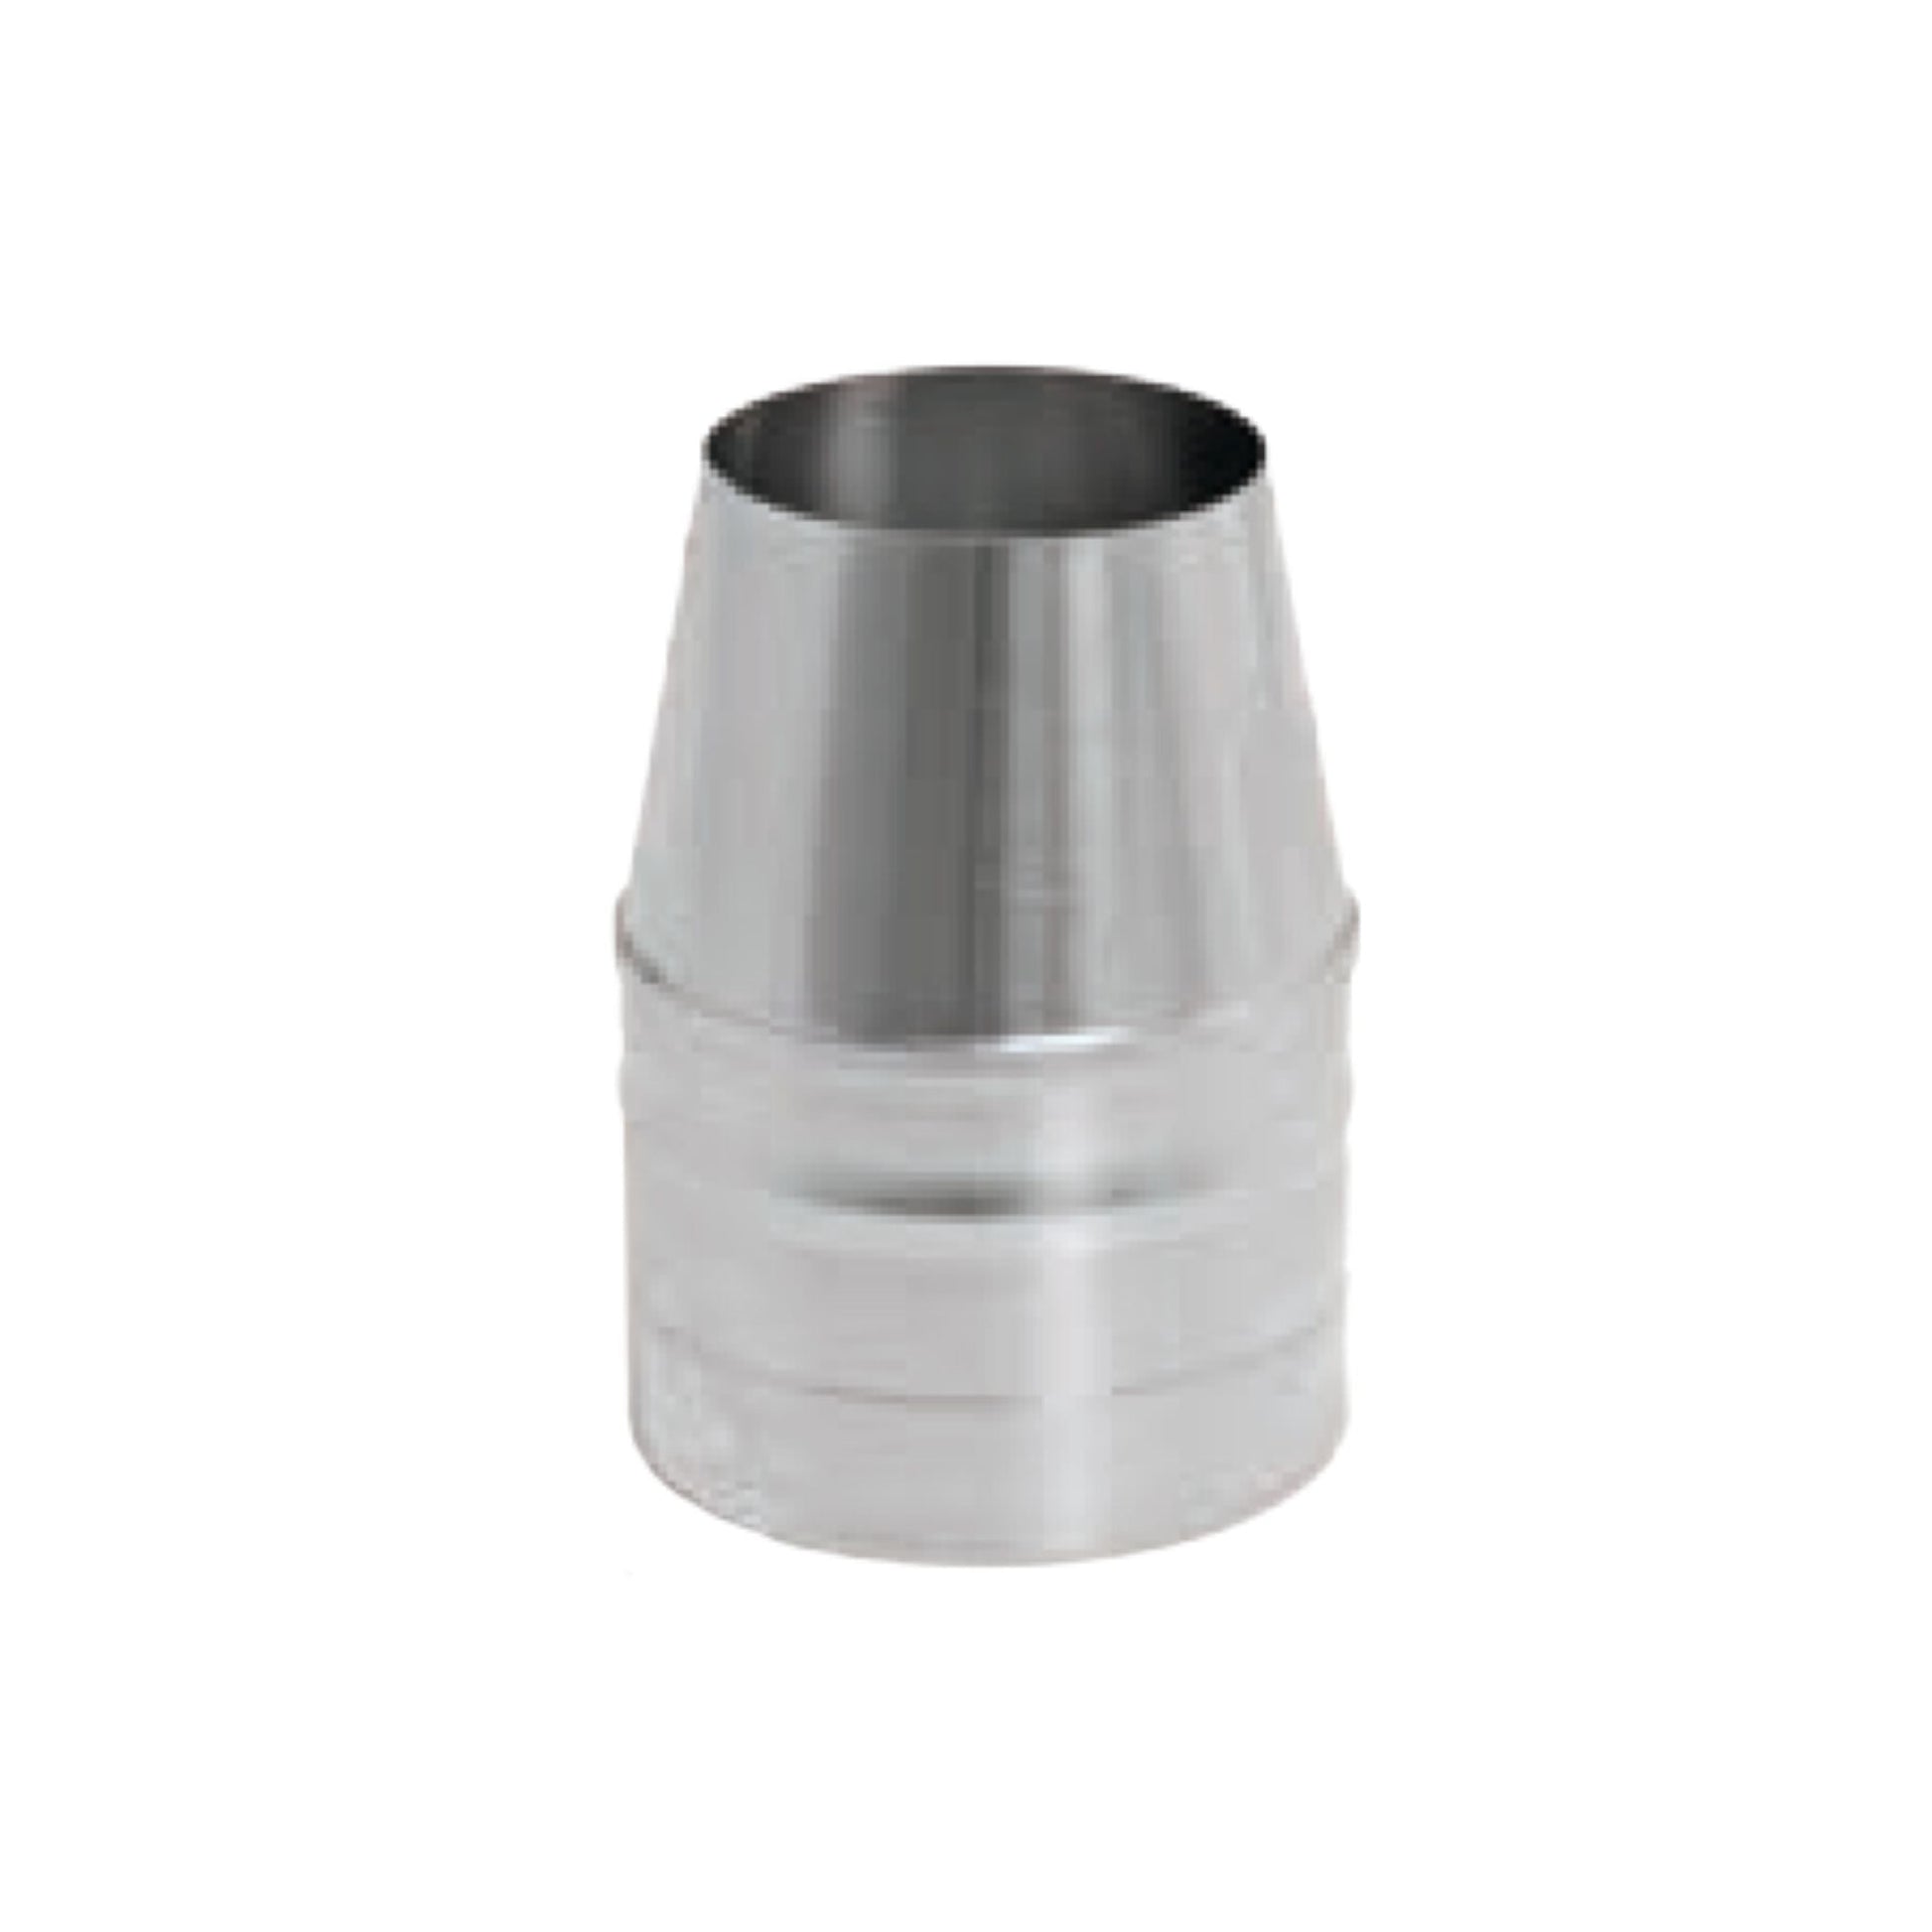 DuraVent FasNSeal 10" x 6" 29-4C Stainless Steel Termination Cone